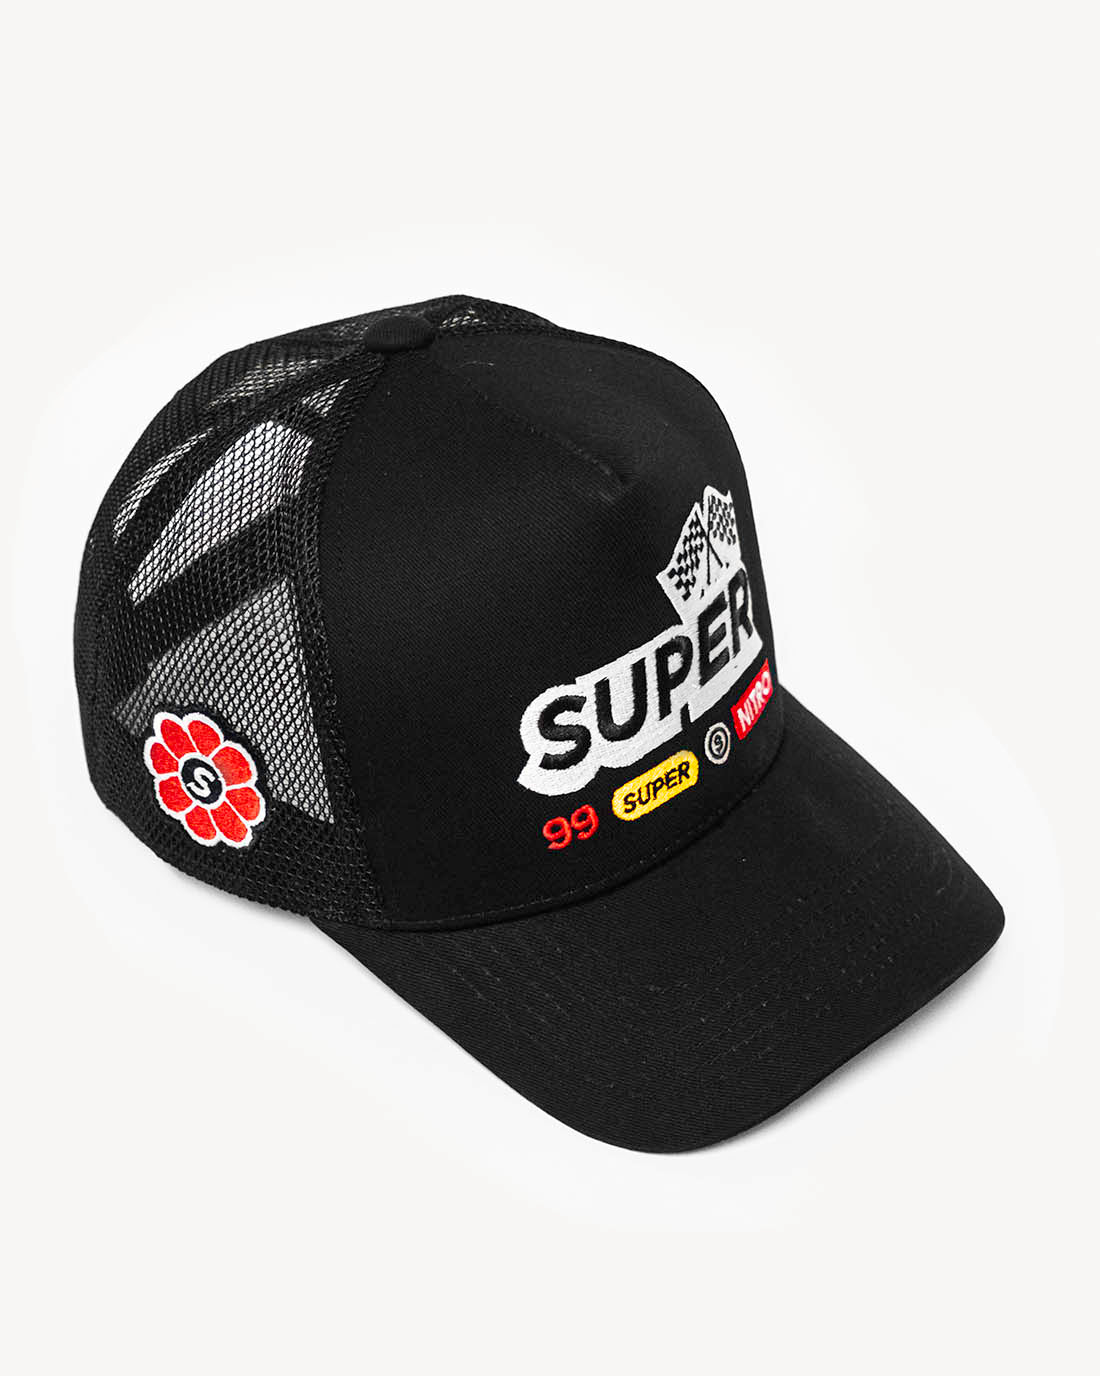 Front side view of a sporty black snapback hat with stylish racing-inspired embroidered design and cooling mesh back.